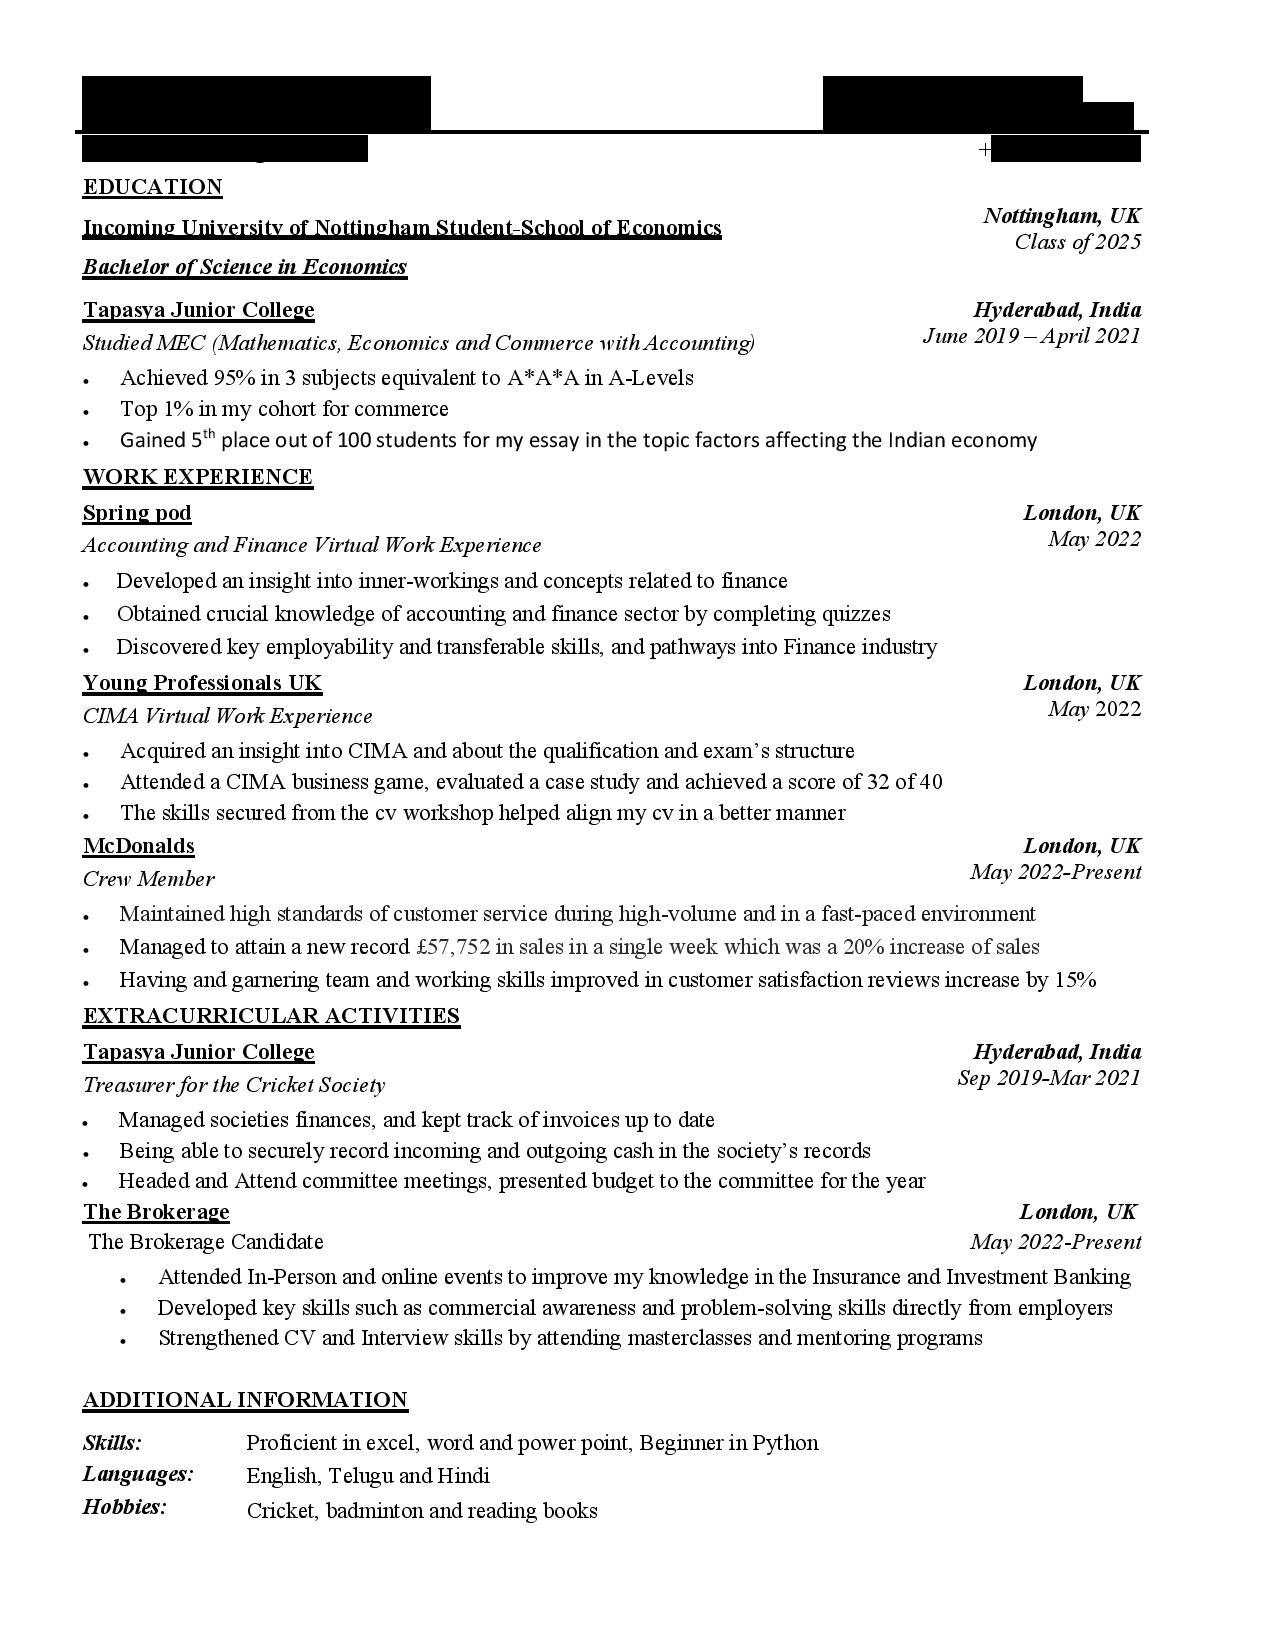 Please roast my CV Incoming University student looking to apply for the spring weeks